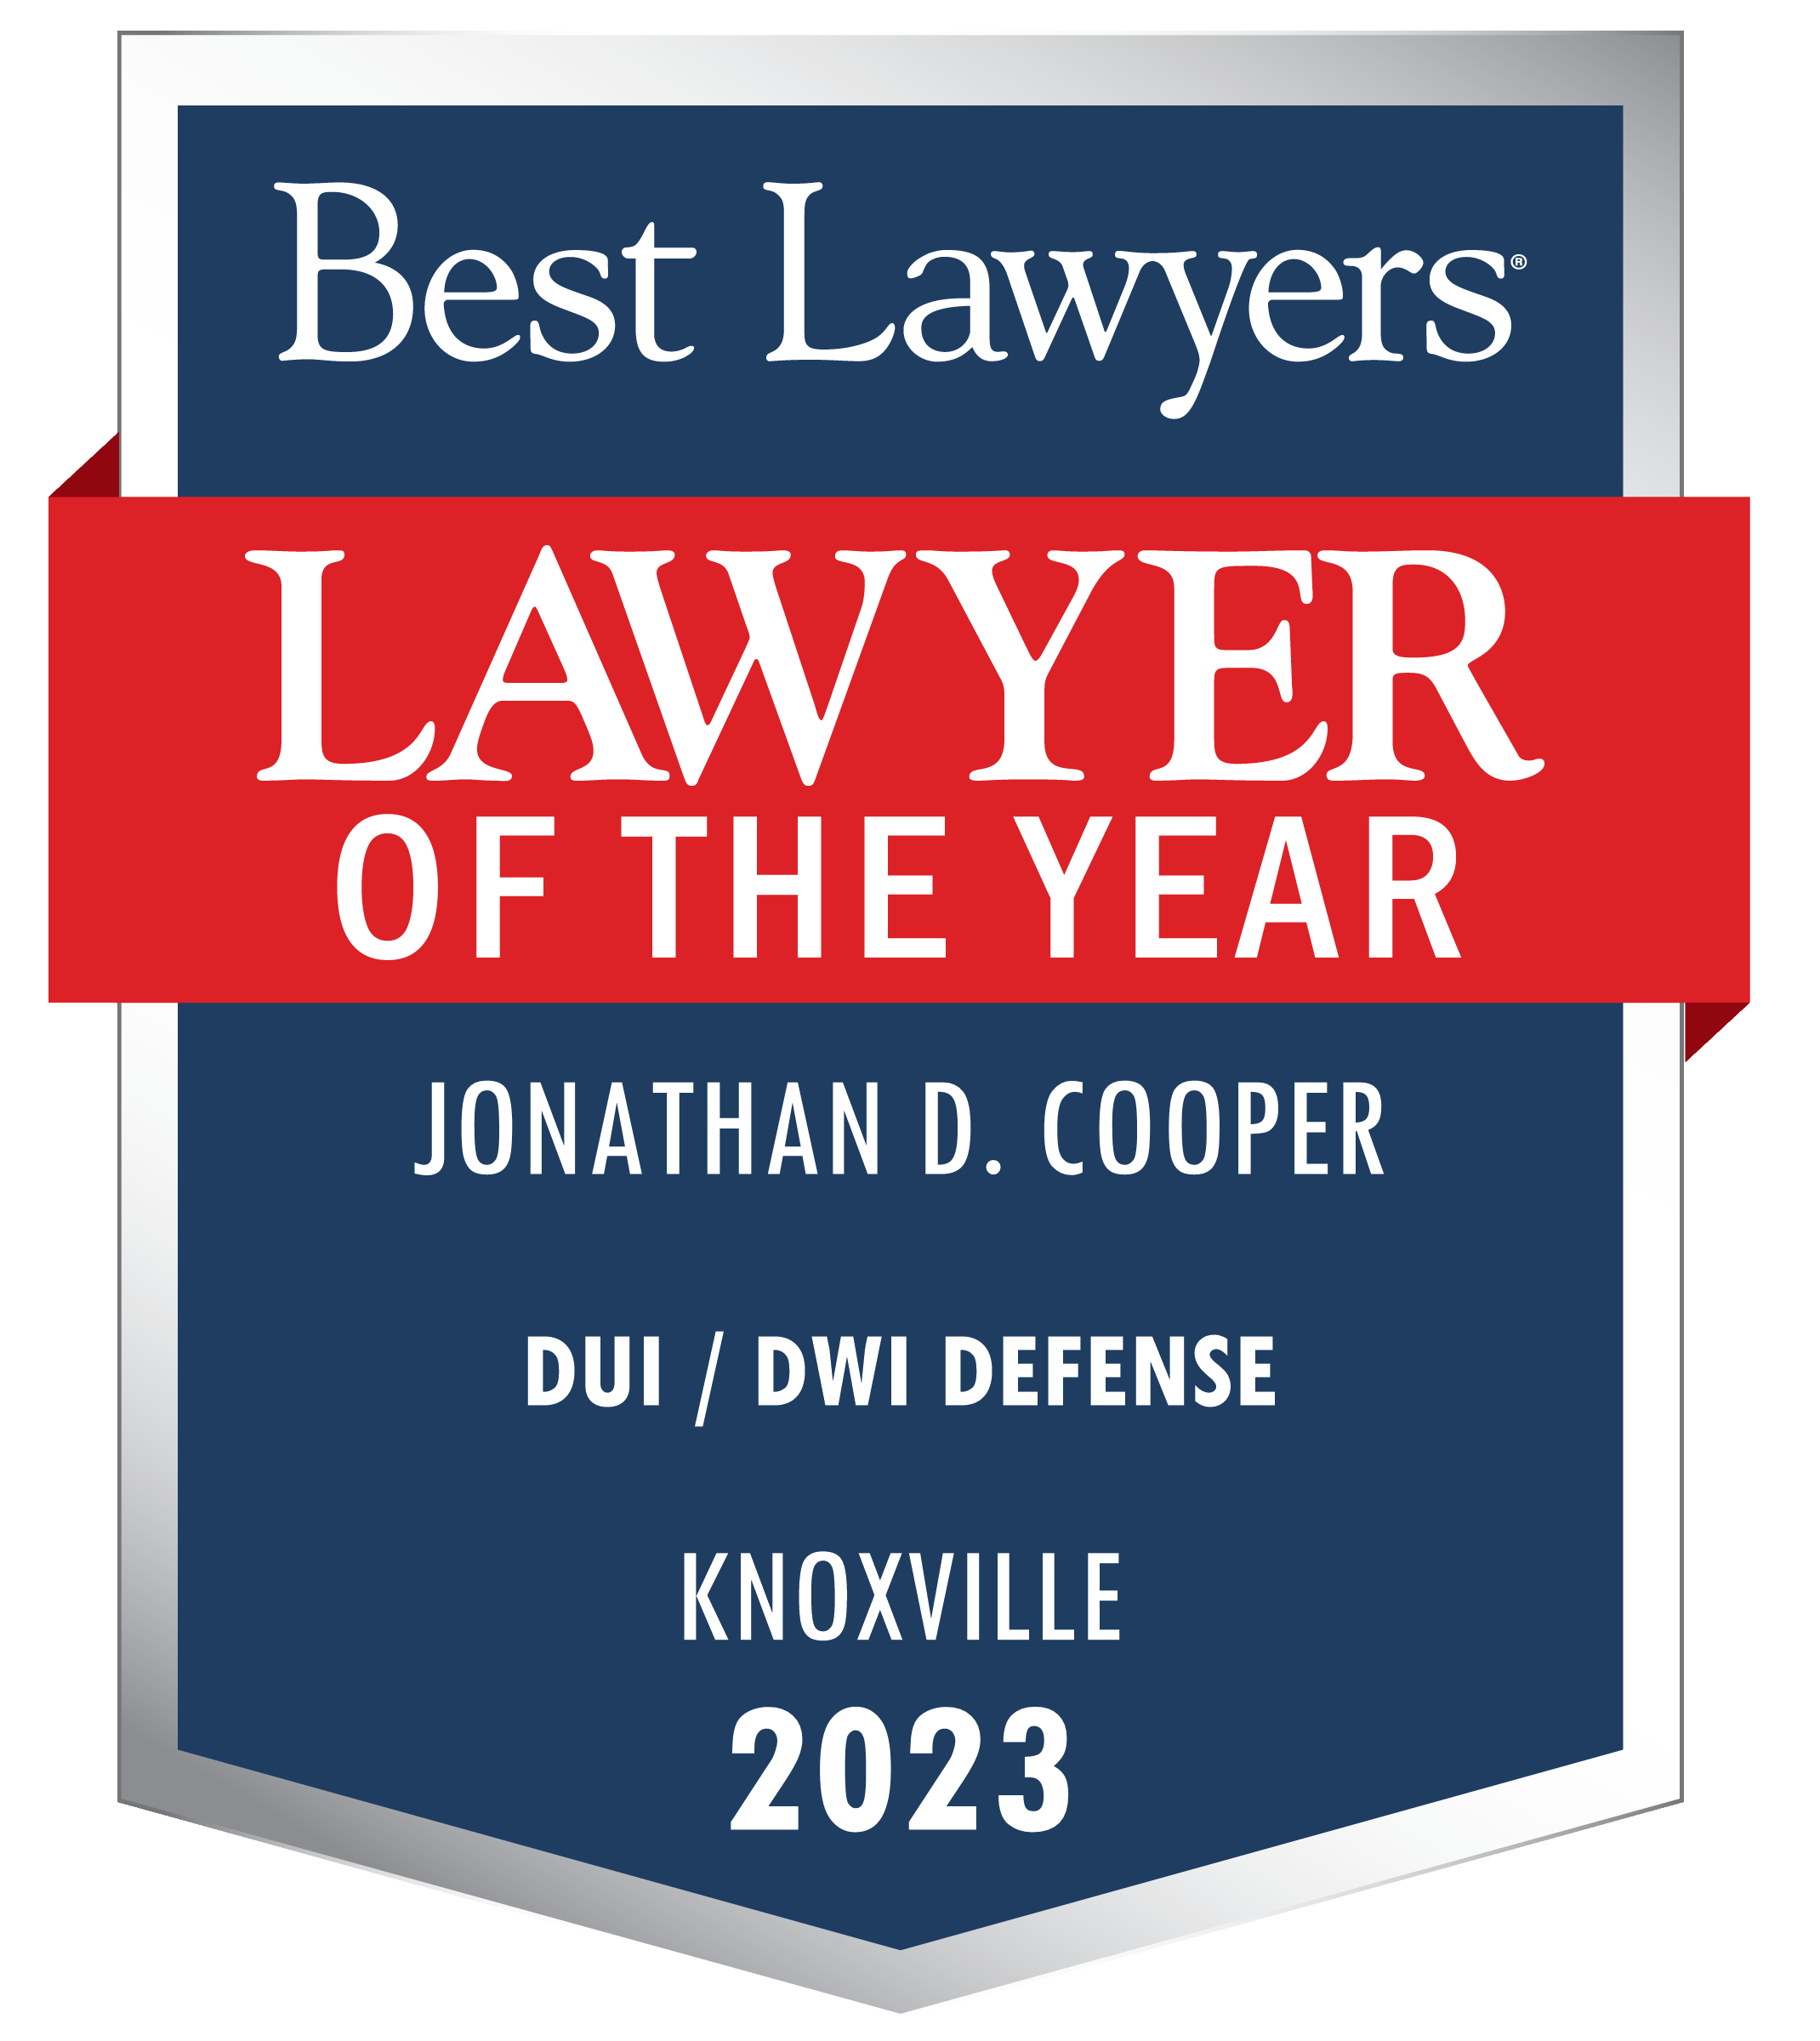 Jonathan Cooper is Lawyer of the Year, DUI/DWI Practice, Knoxville Metro Area, Best Lawyers in America